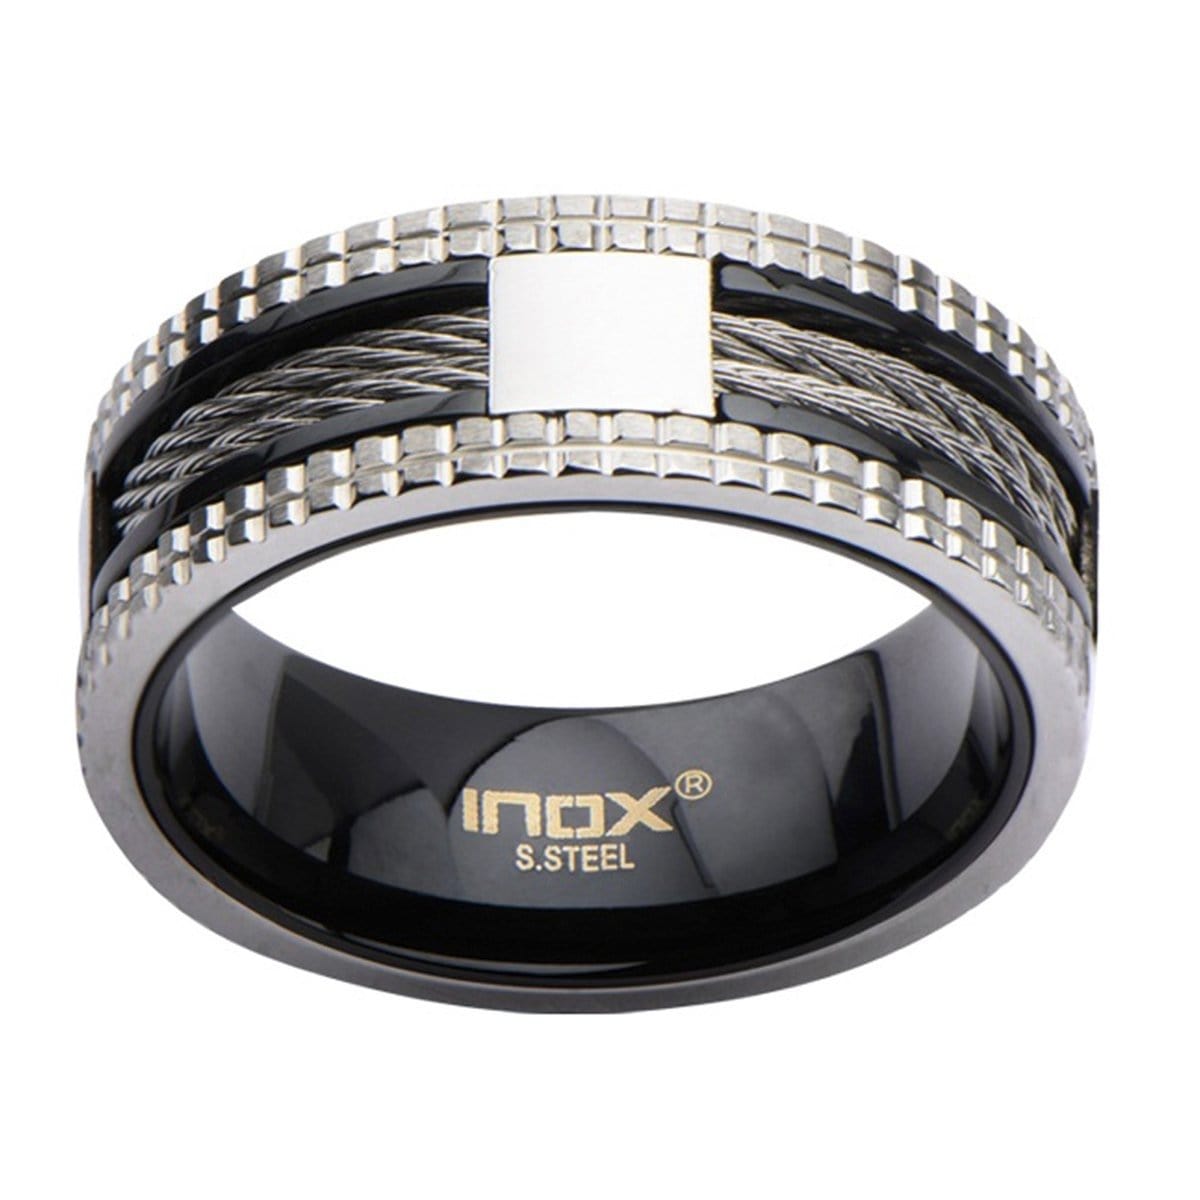 INOX JEWELRY Rings Black and Silver Tone Stainless Steel Exposed Cable Studded Border Ring